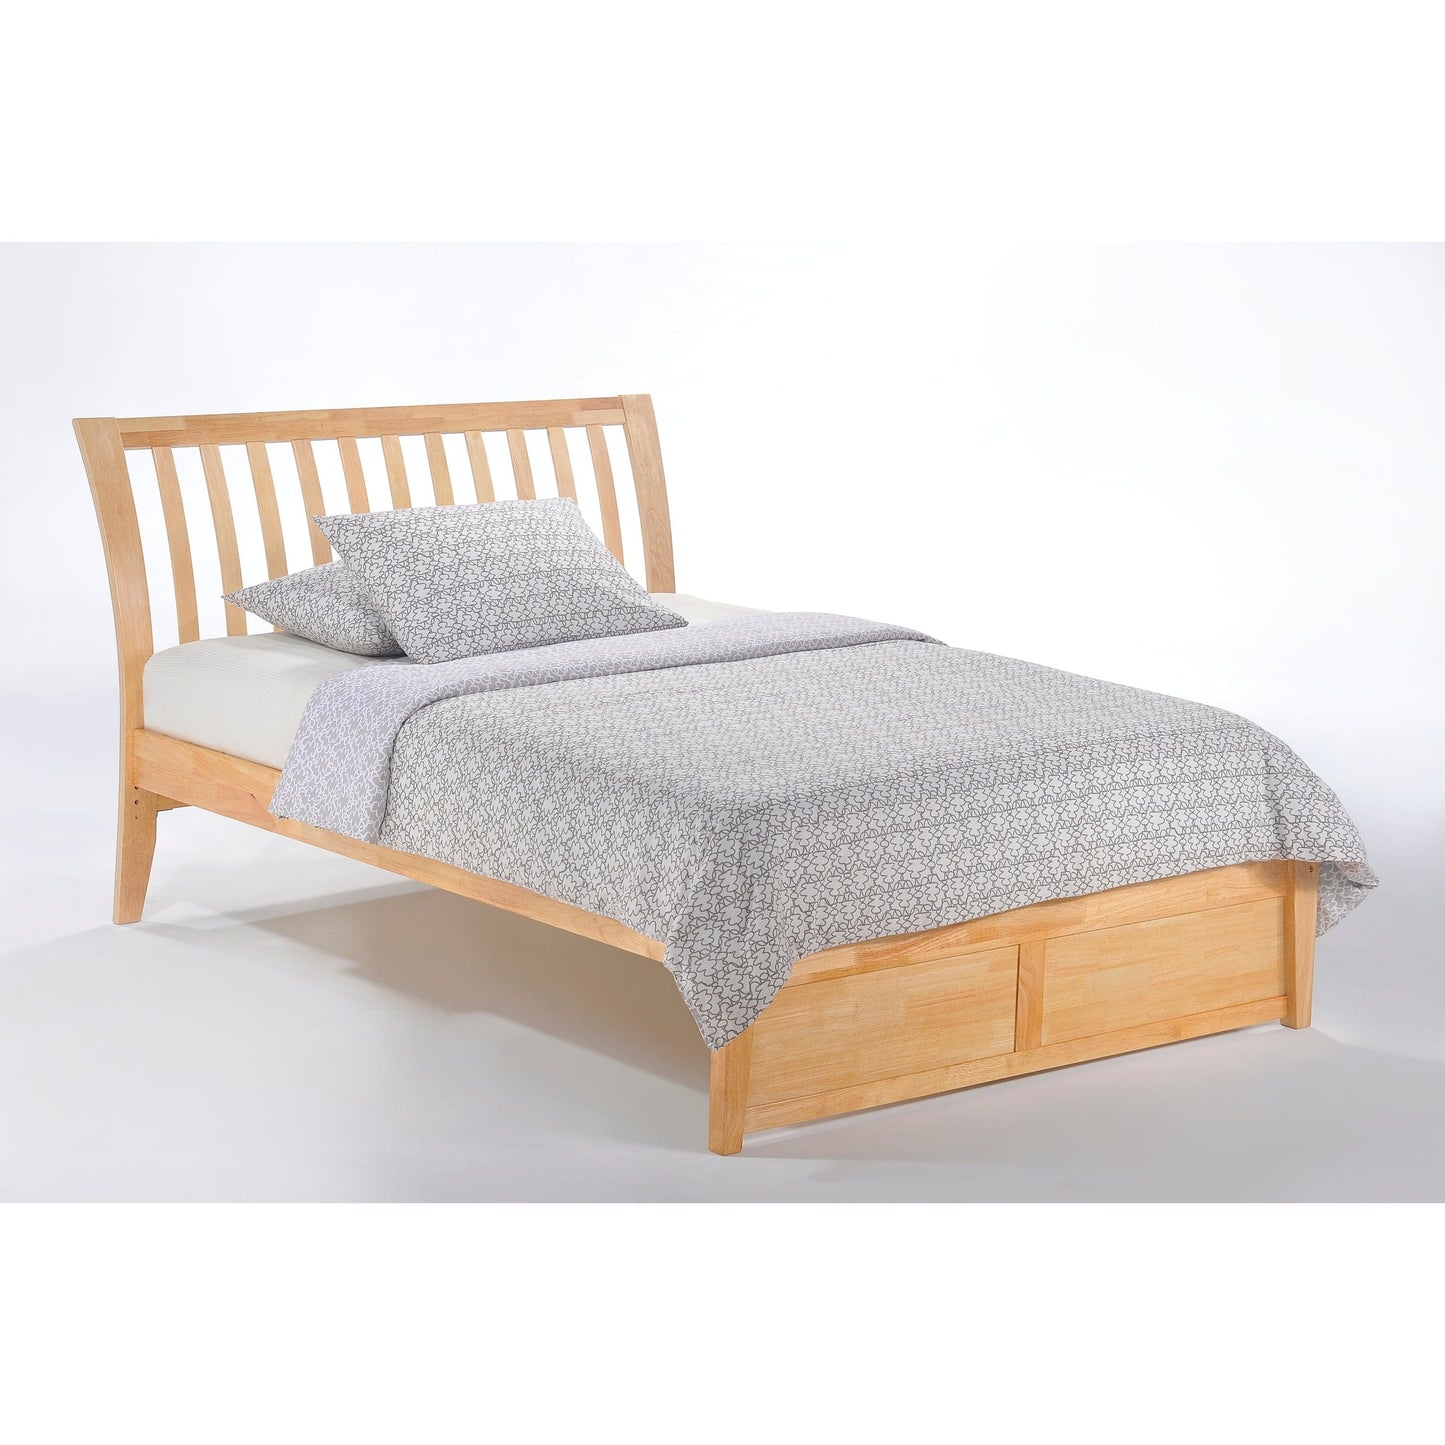 The Bedroom Emporium Eastern King K Series Nutmeg Bed in cherry finish Natural